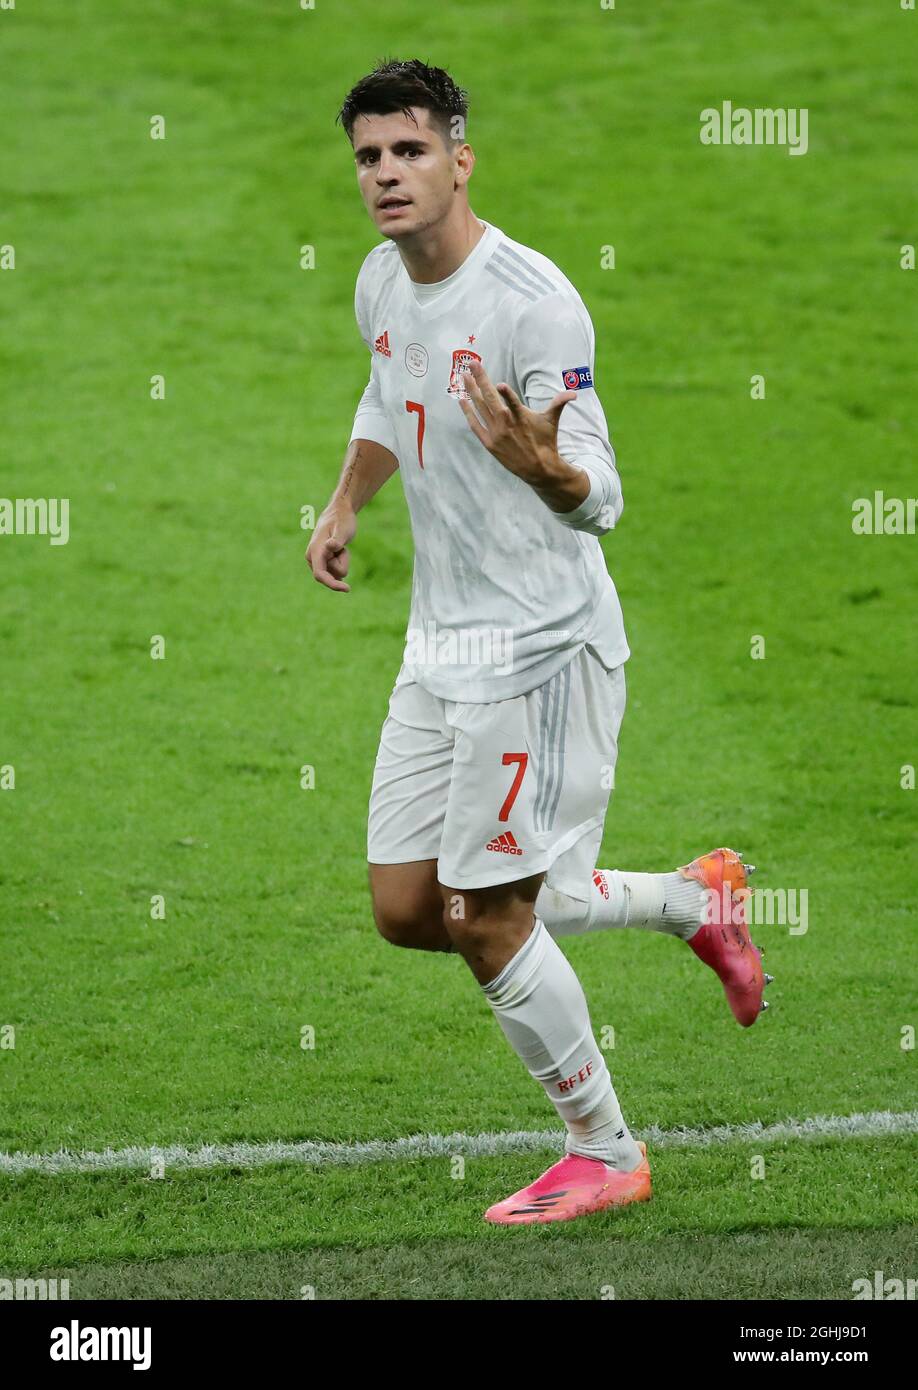 London, England, 6th July 2021. Alvaro Morata of Spain celebrates scoring the equalising goal during the UEFA Euro 2020 match at Wembley Stadium, London. Picture credit should read: David Klein / Sportimage via PA Images Stock Photo